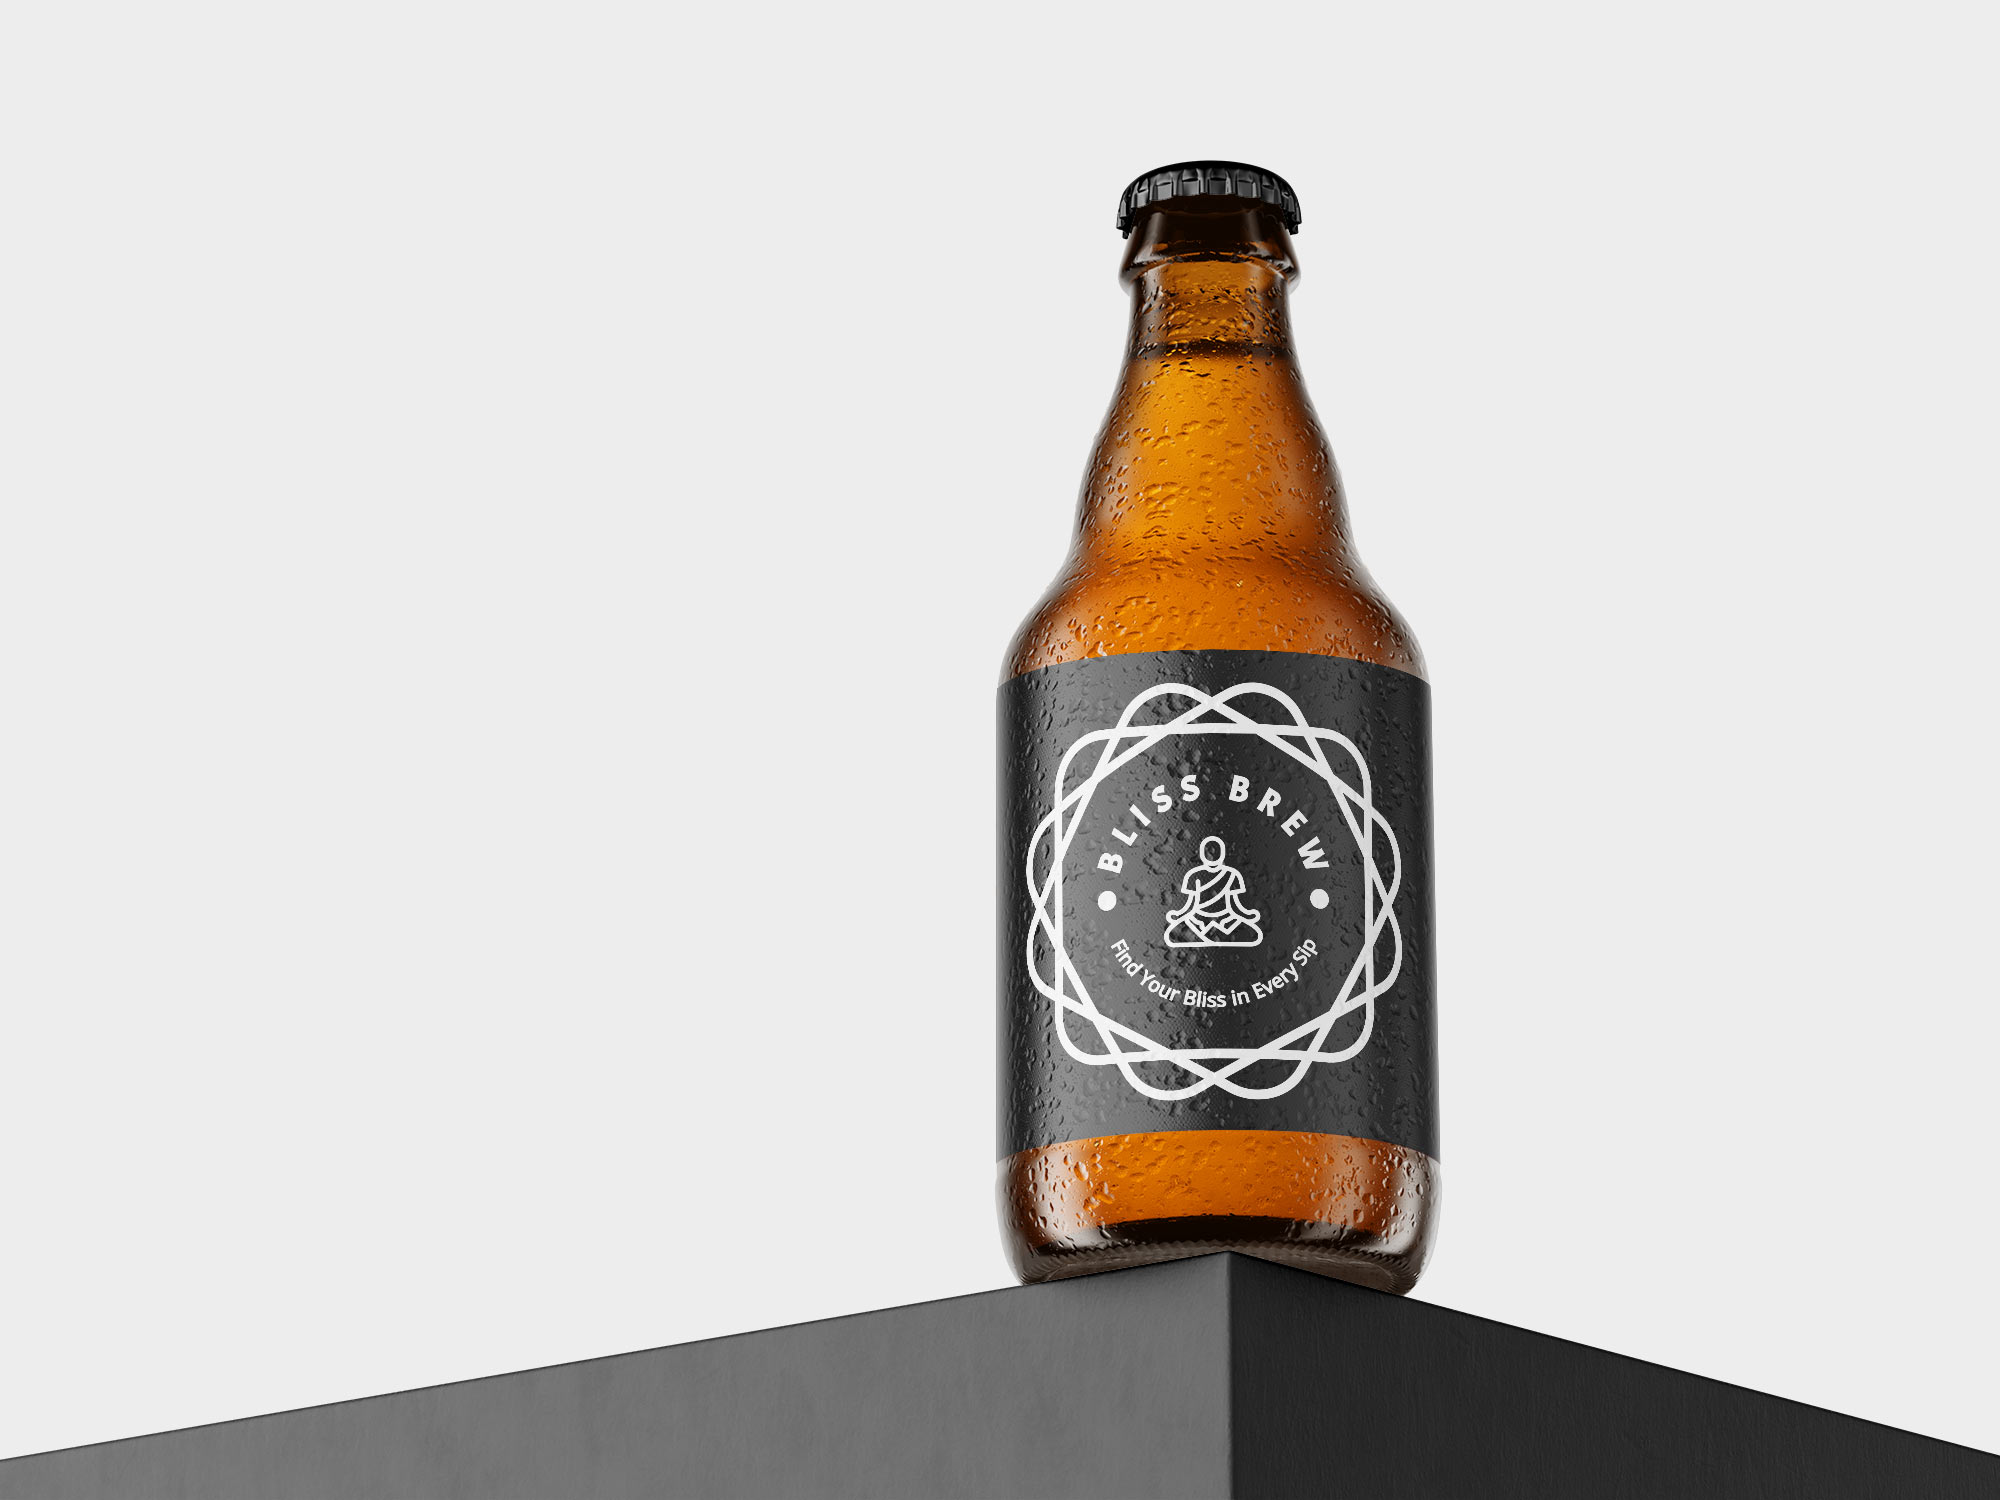 A beer bottle with a logo on it sitting on a black cube.